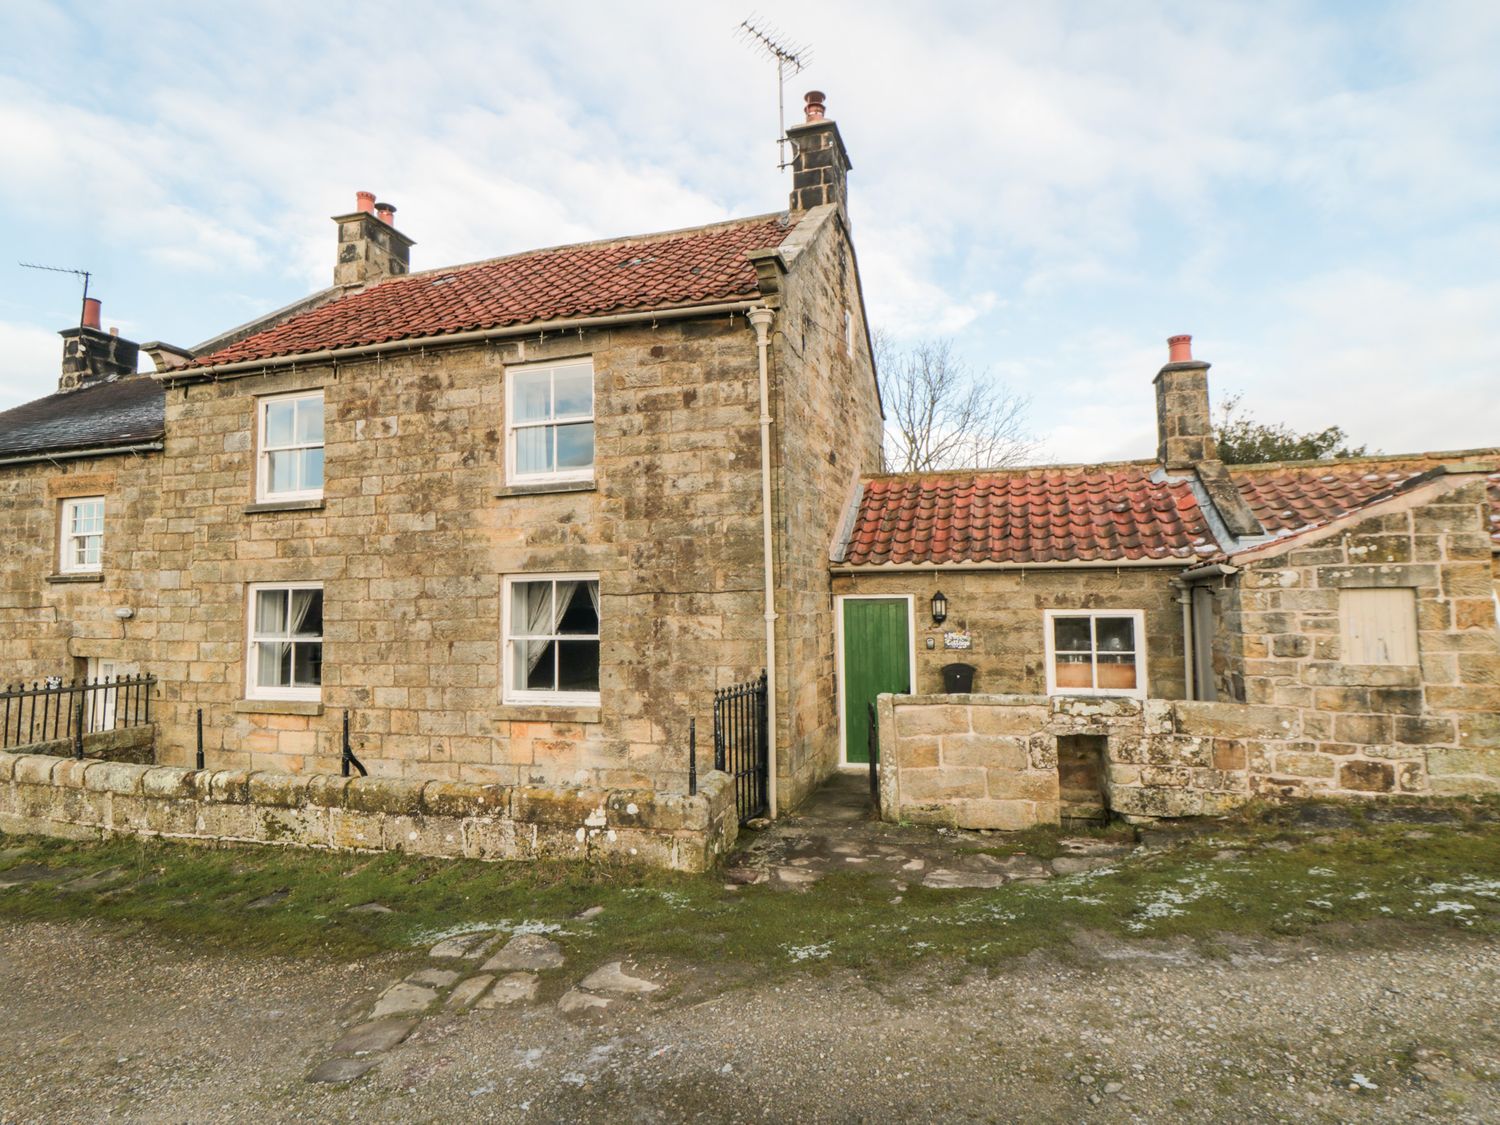 1 Brow Cottages, Yorkshire